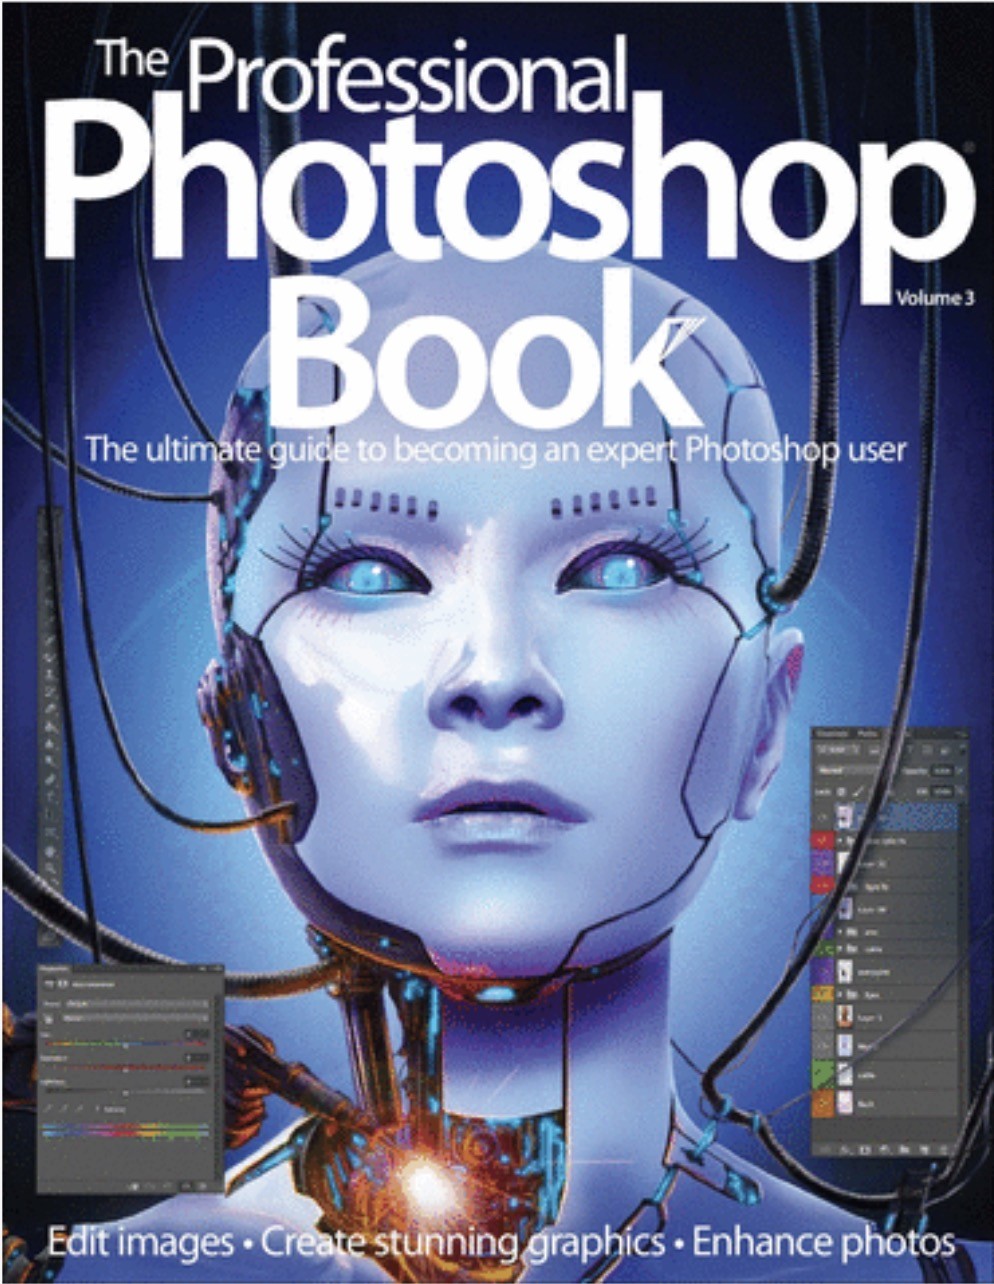 The piece was also used on the "Professional Photoshop Book" Published by Imagine Publishing.